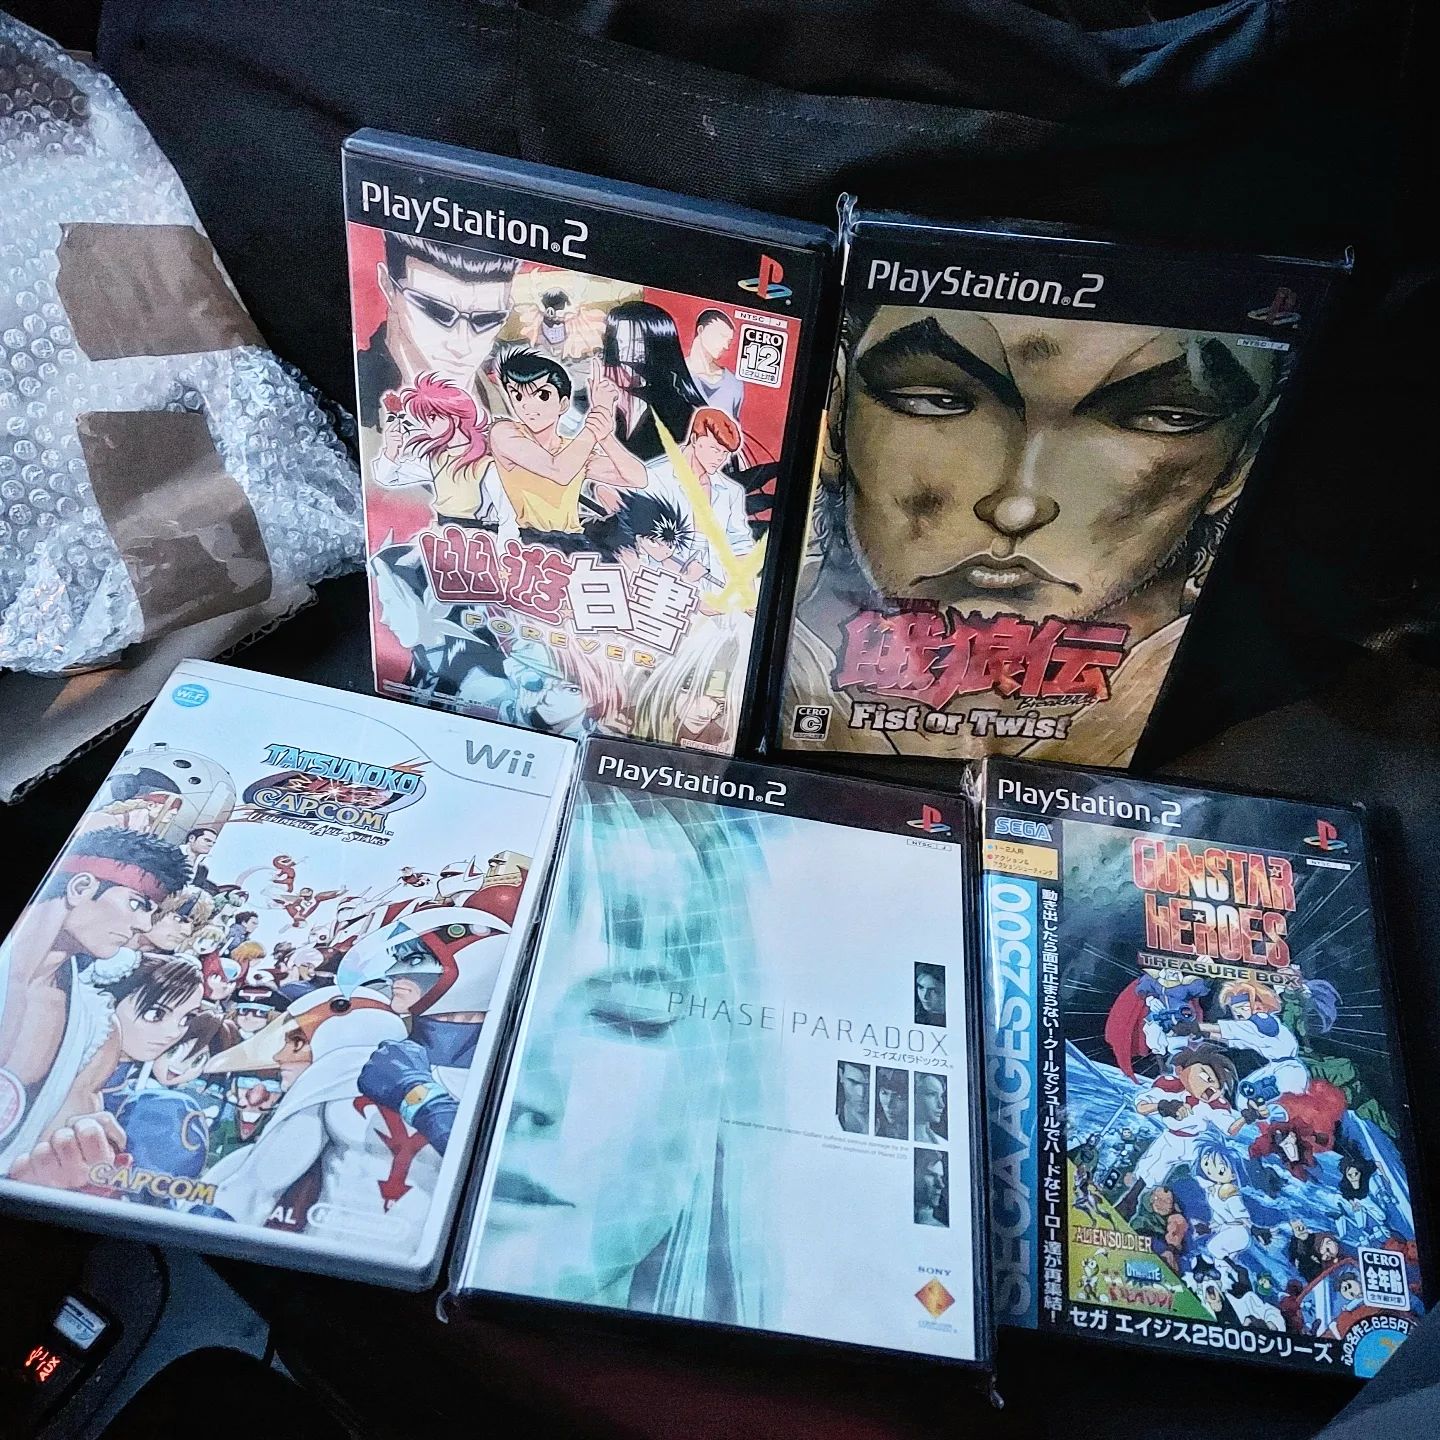 Some awesome new additions have arrived! 3 pretty unique fighting games, a horror adventure and a Treasure Games Sega Ages game.

I will highlight each of these soon in seperate posts. The Gunstar Heroes Sega Ages aflso contains Alien Soldier and Dynamite Headdy, btw!

#retrogamepapa #gaming #gamecollector #gamecollecting #retrogames #retrogamecollector #ps2 #horrorgames #survivalhorror #phaseparadox #garouden #fistortwist #treasure #tatsunoko #capcom #tatsunokovscapcom #YuYuHakusho